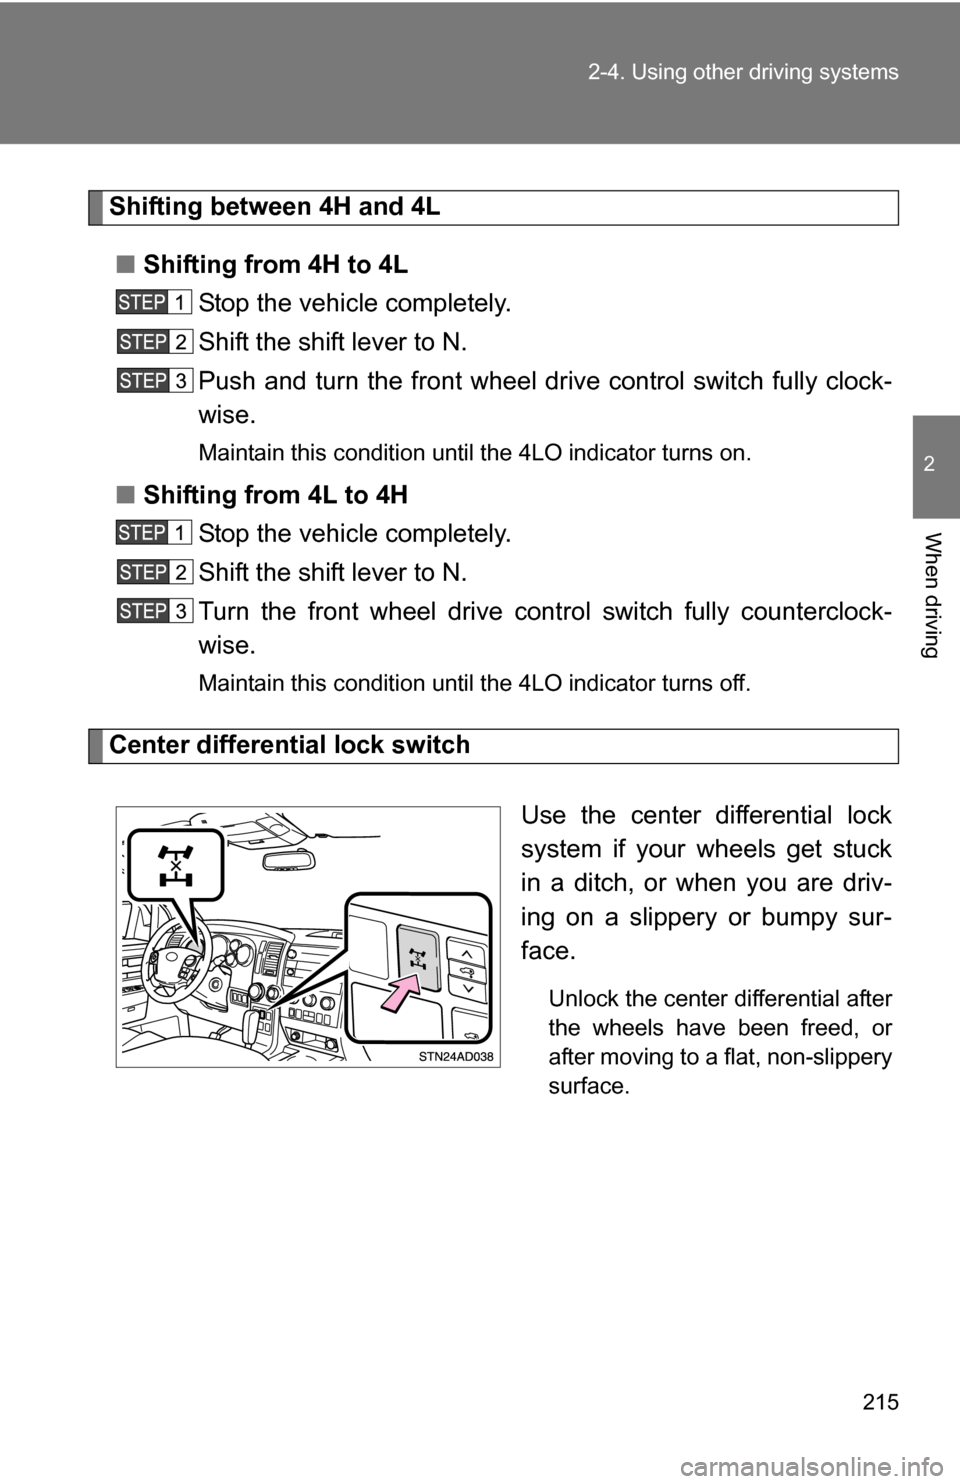 TOYOTA SEQUOIA 2009 2.G Owners Manual 215
2-4. Using other 
driving systems
2
When driving
Shifting between 4H and 4L
■ Shifting from 4H to 4L
Stop the vehicle completely.
Shift the shift lever to N.
Push and turn the front wheel dr ive